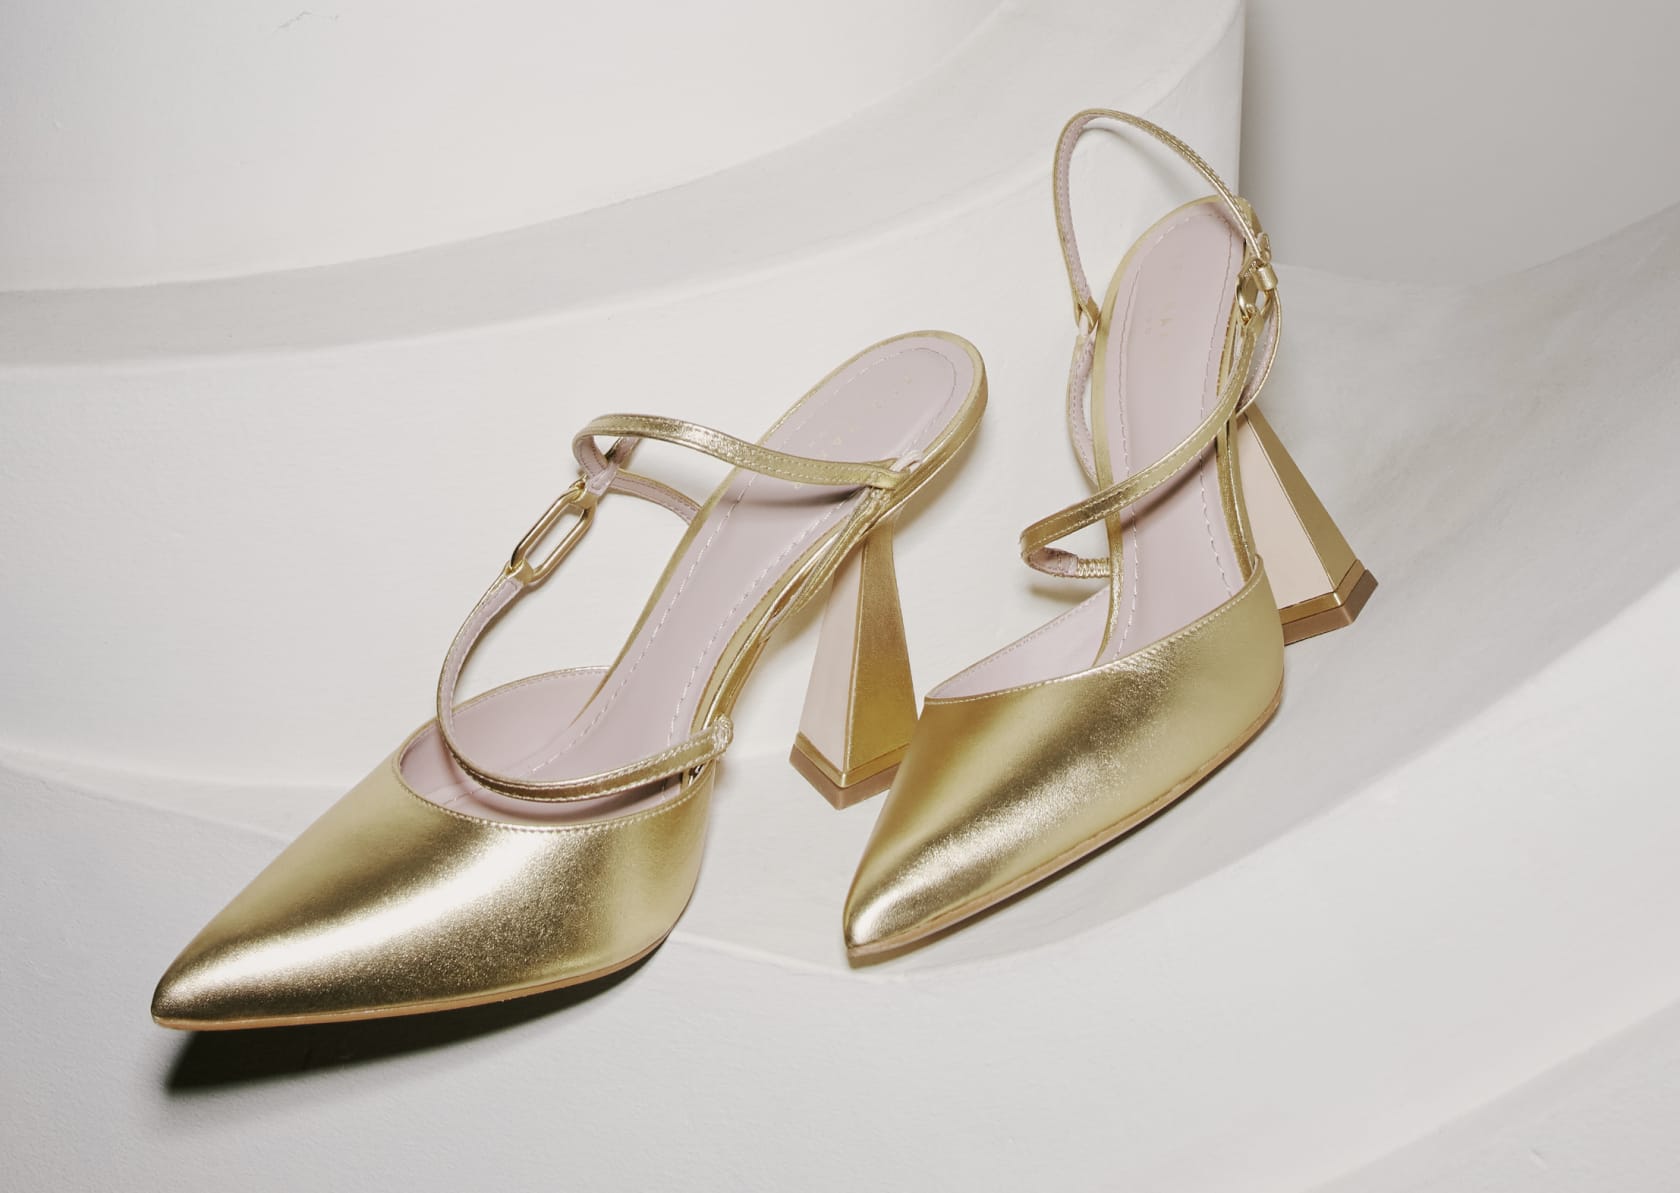 Women's gold heeled shoes